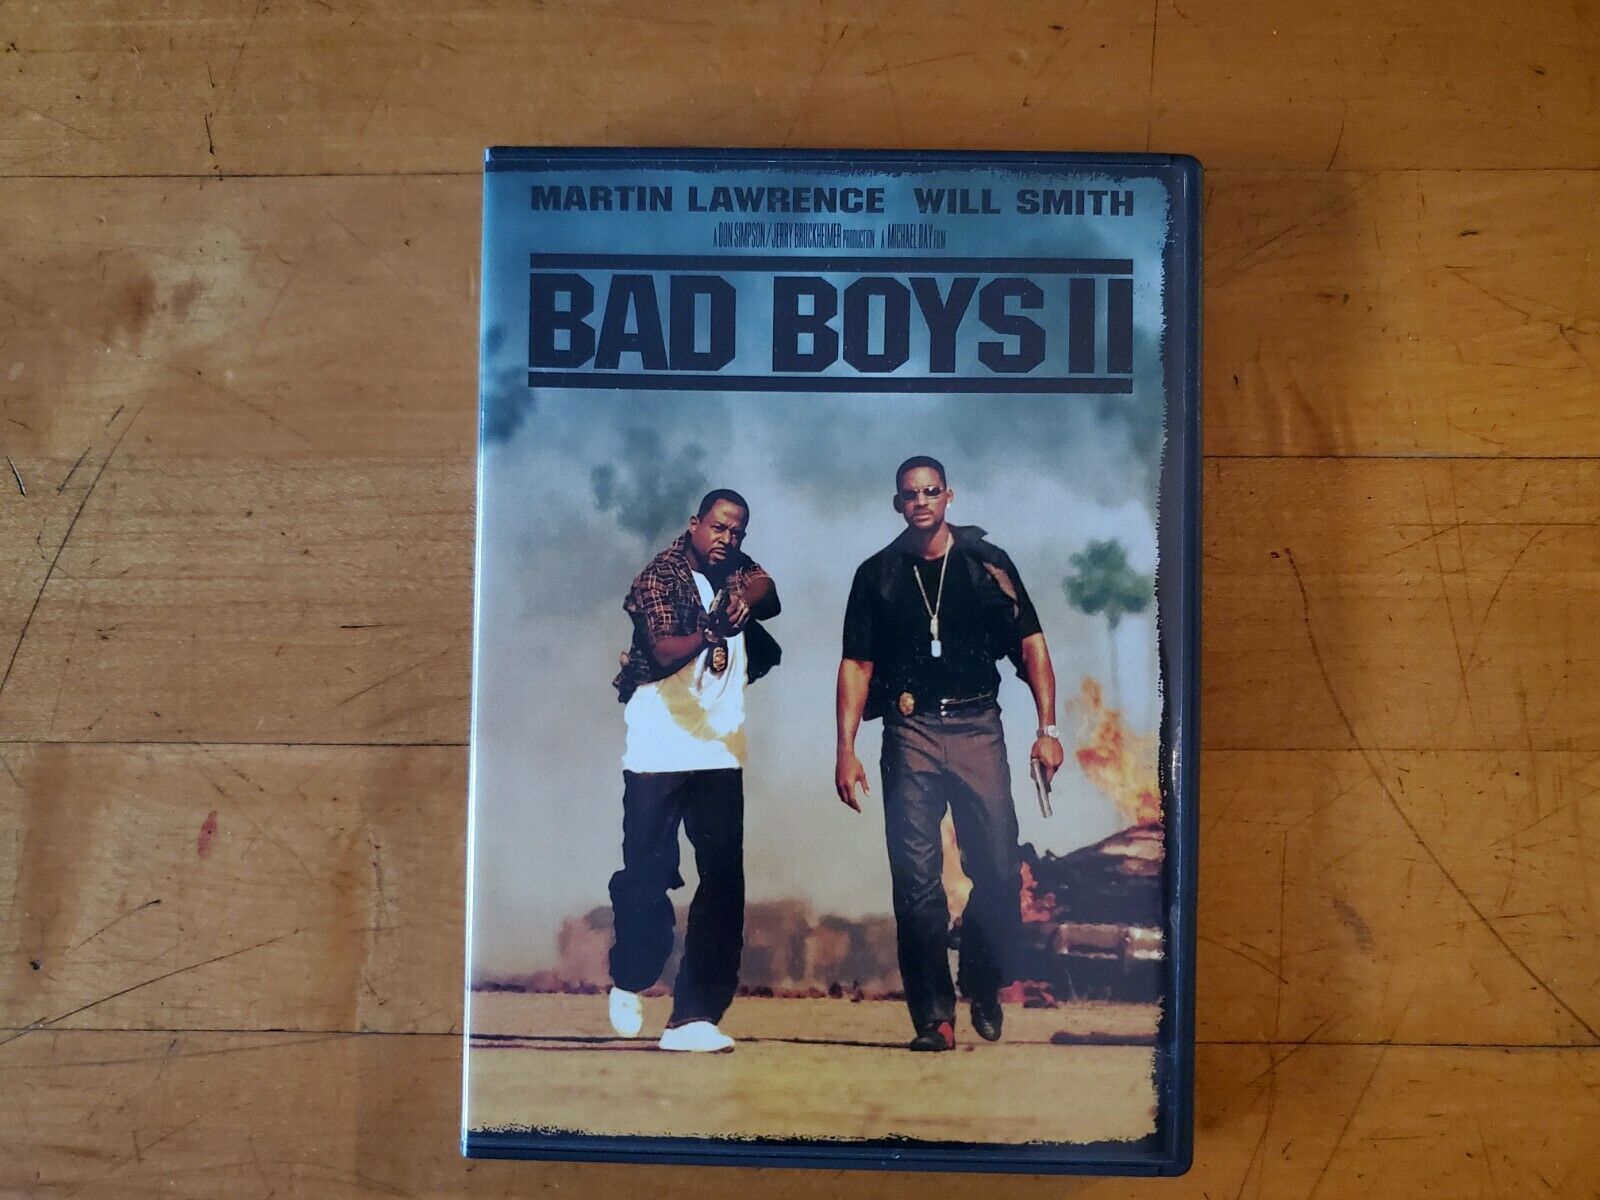 Primary image for Bad Boys II (DVD, 2003, 2-Disc Set, Special Edition)